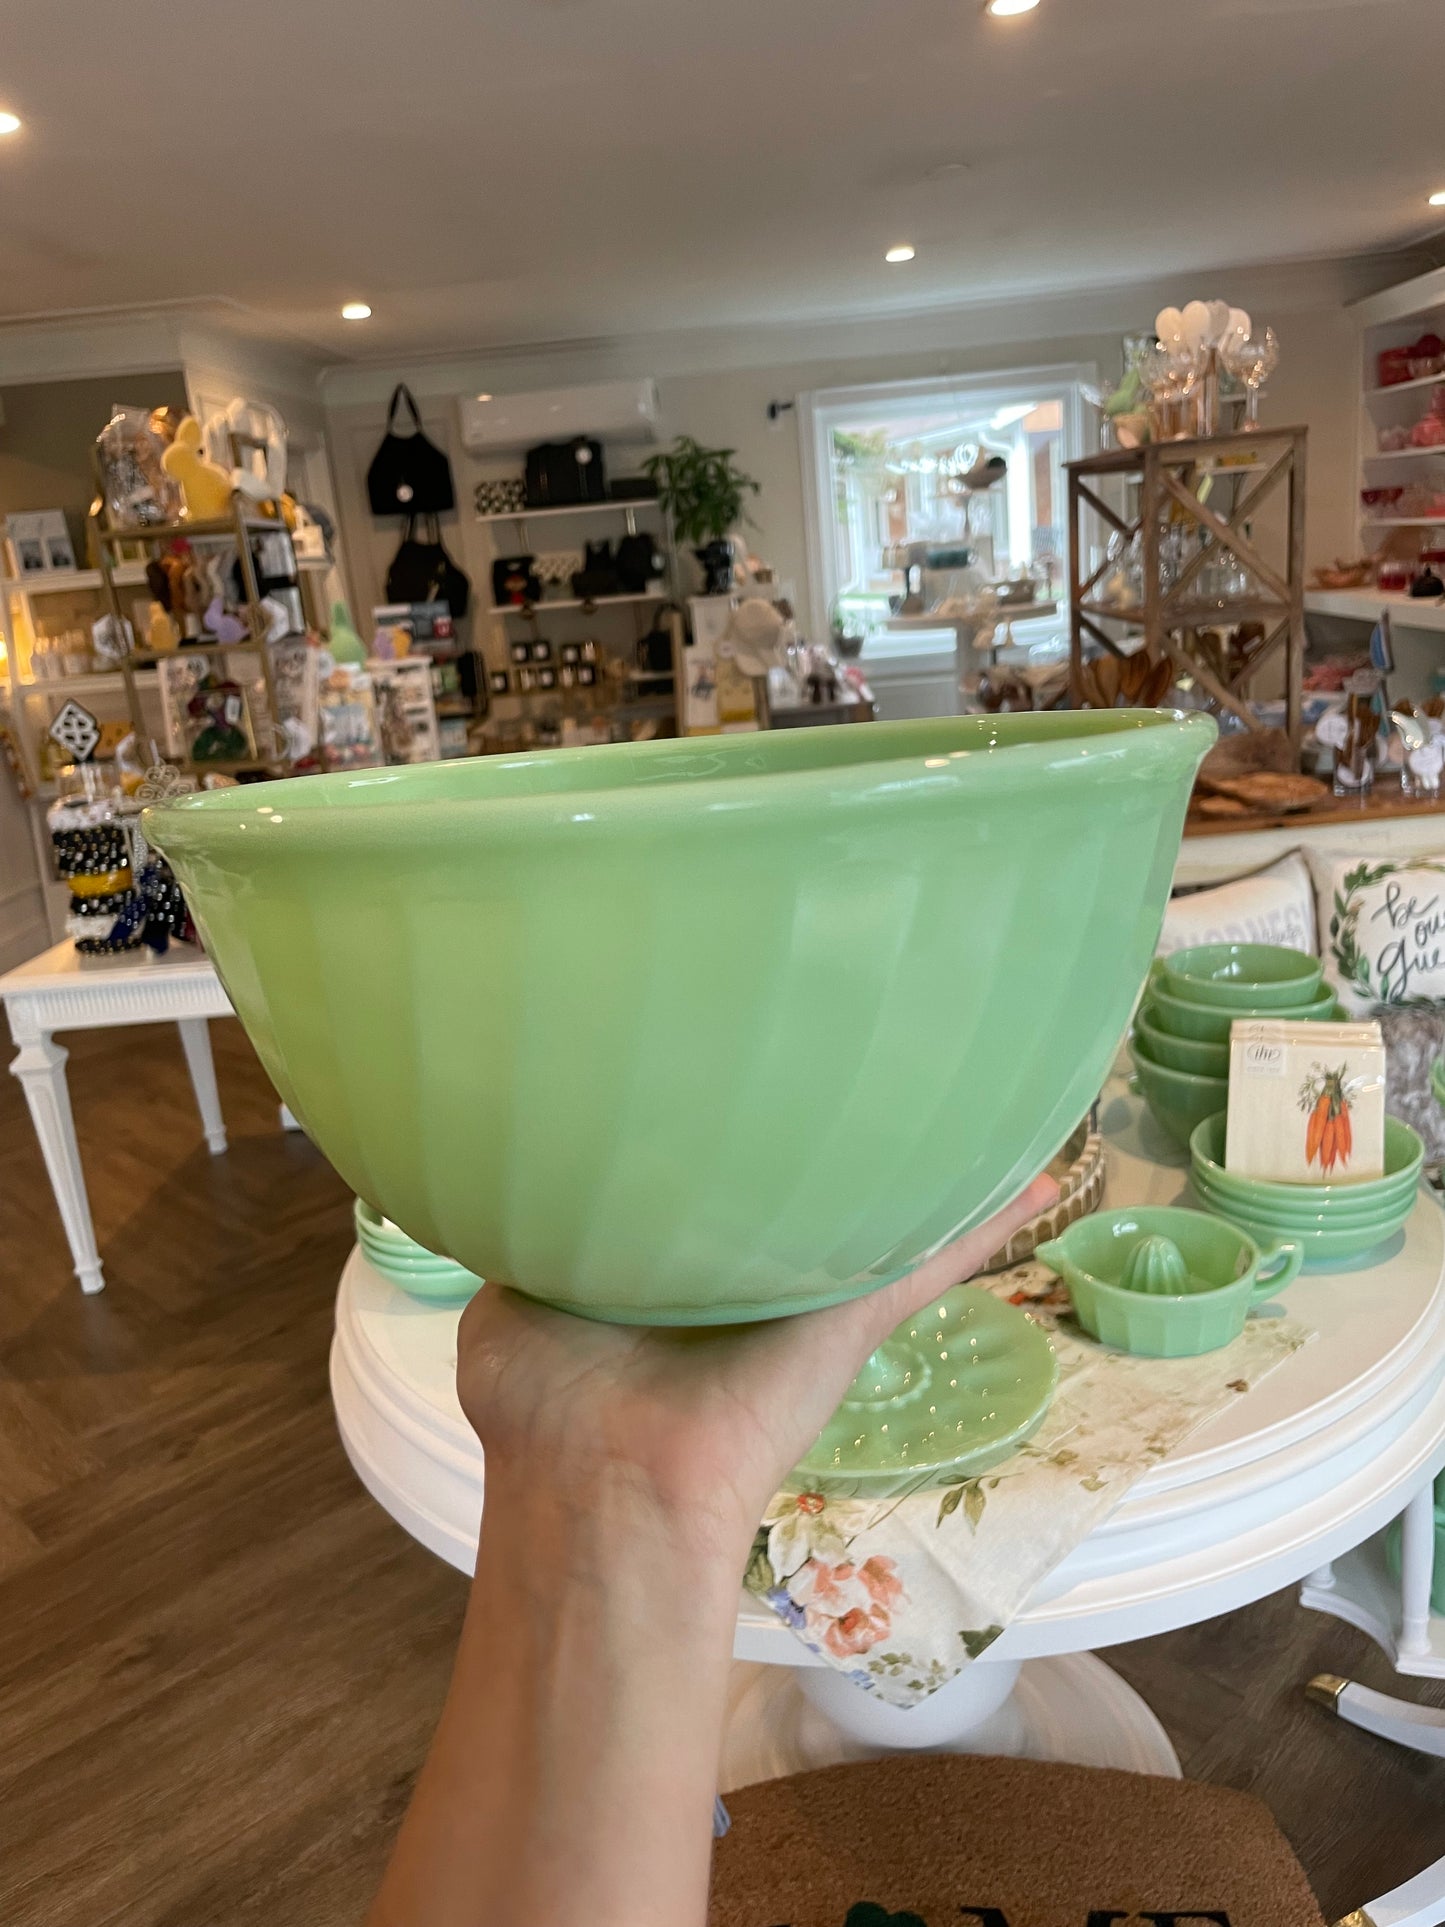 Vintage King Oven Ware Jadeite Mixing Bowl With Pour Spout and